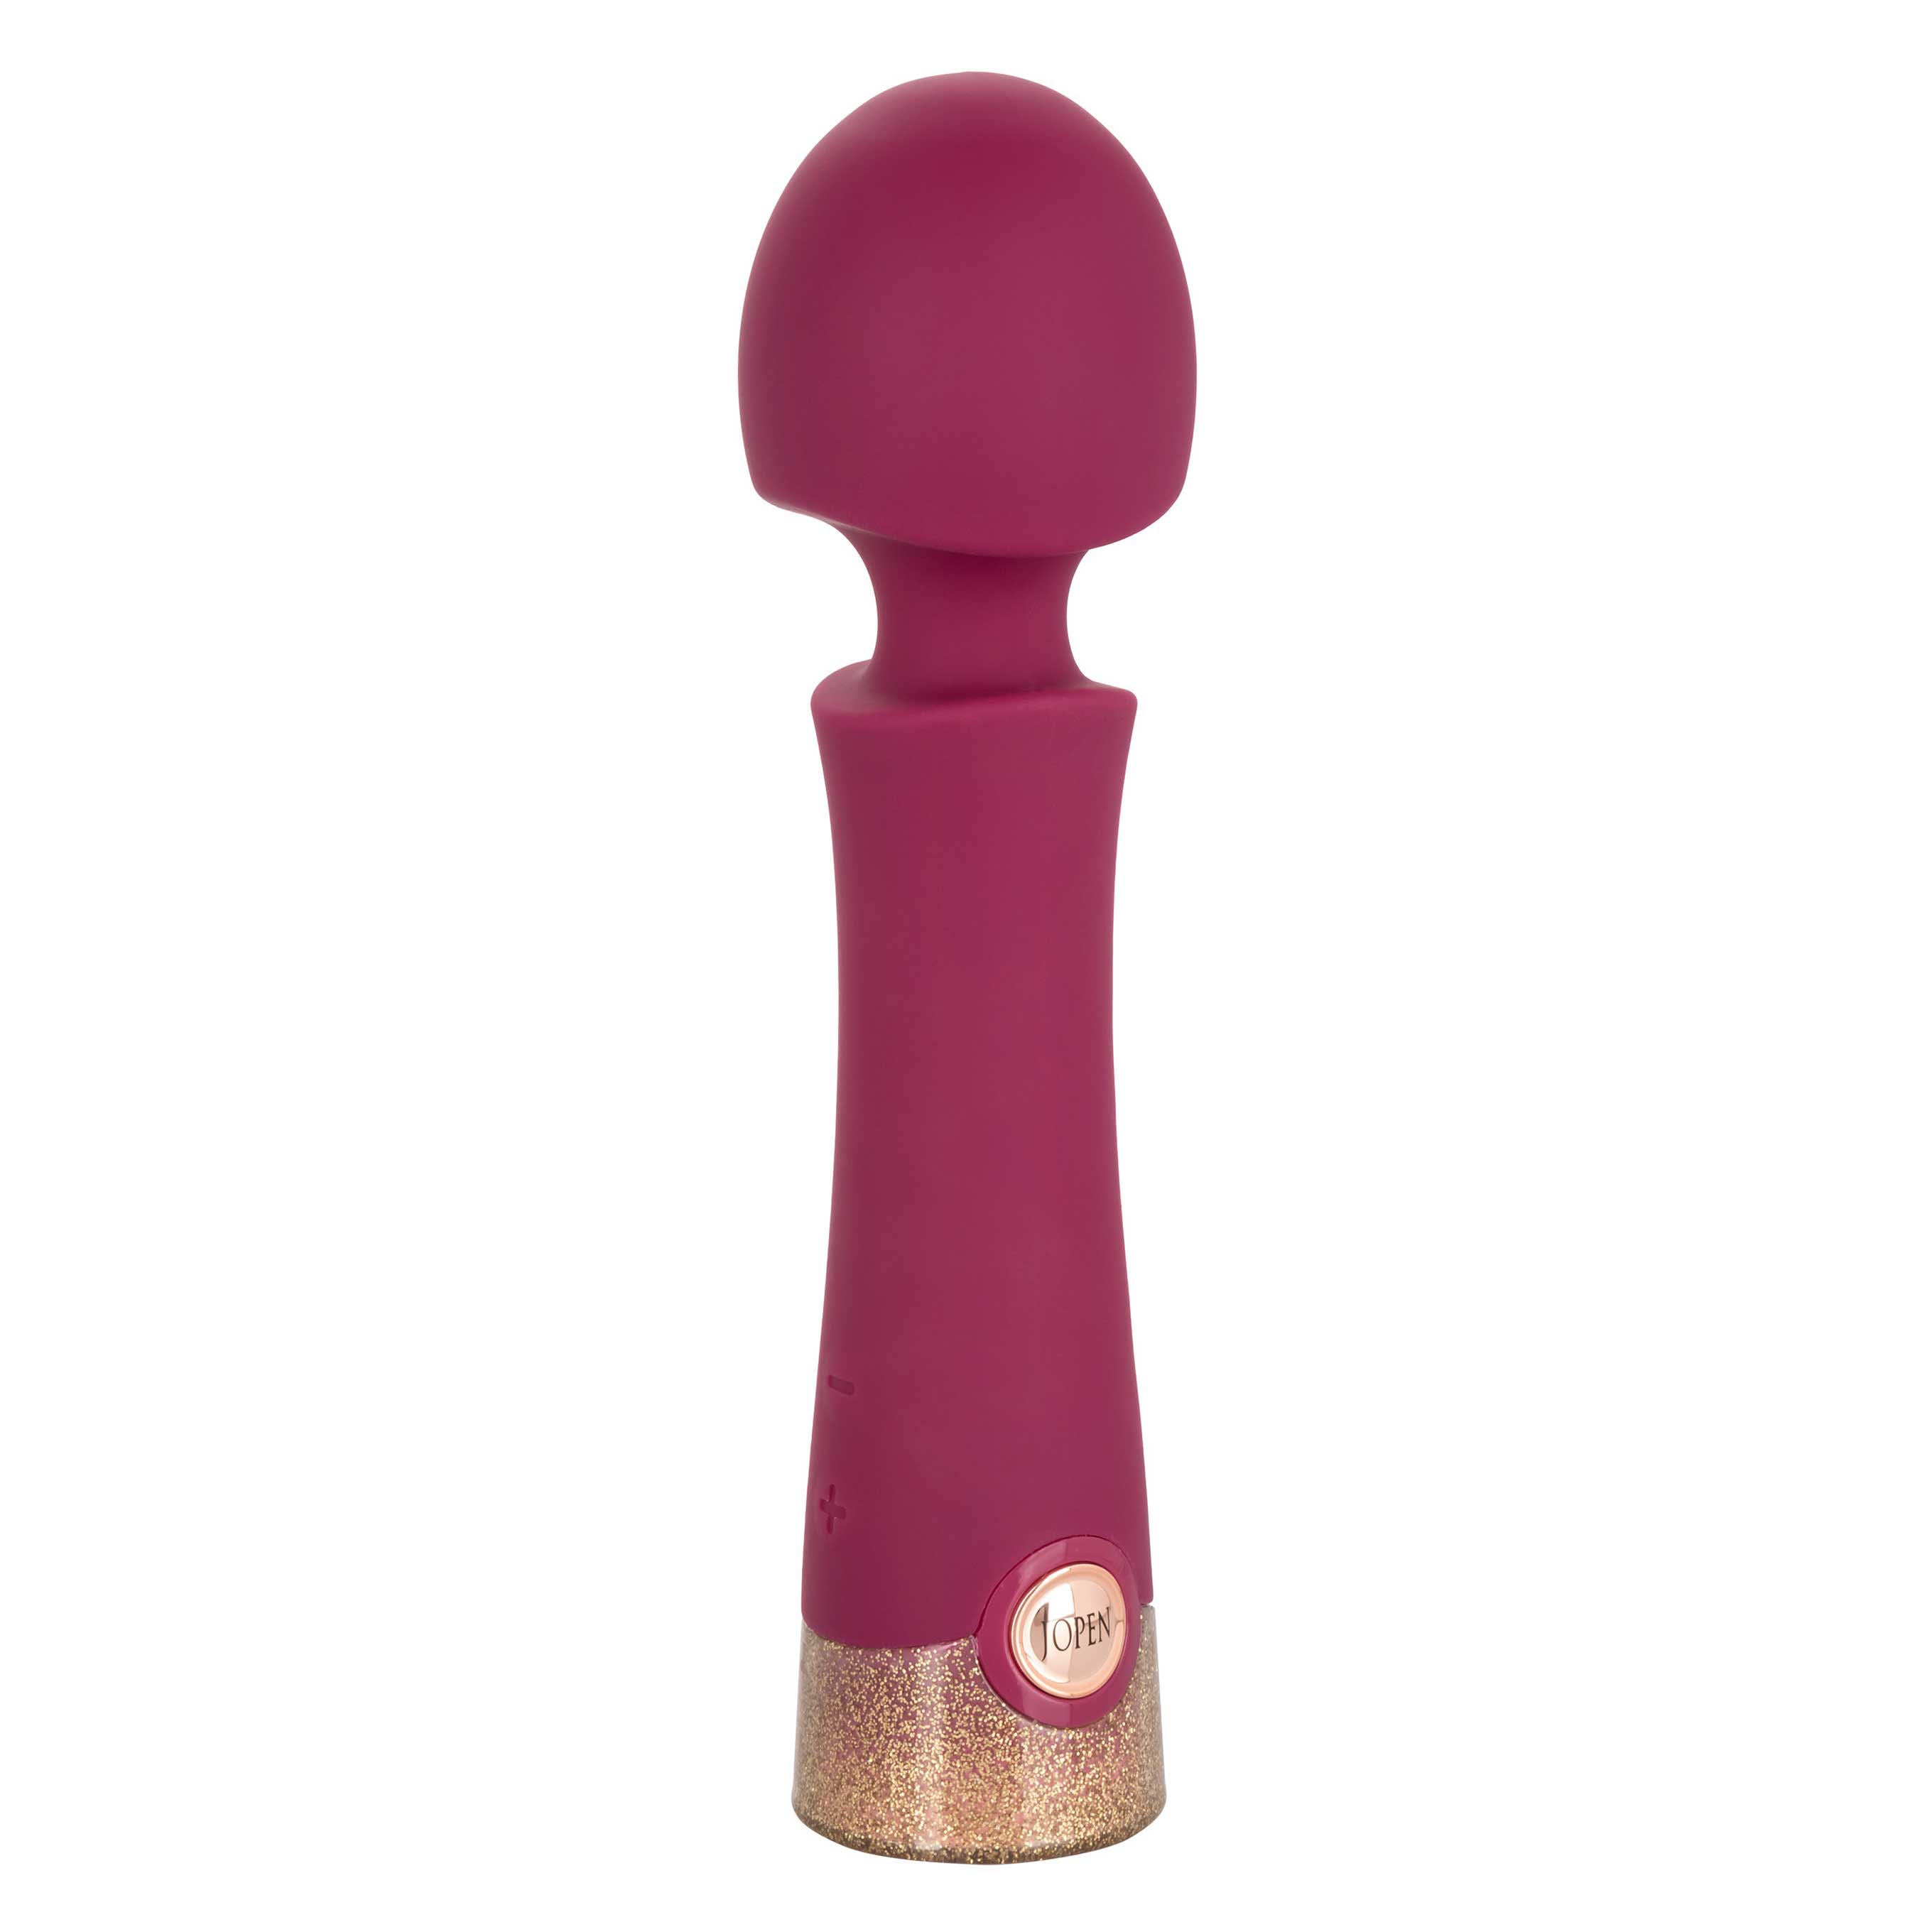 Jopen Starstruck Romance Wand Vibrator > Sex Toys For Ladies > Wand Massagers and Attachments 8 Inches, Female, NEWLY-IMPORTED, Silicone, Wand Massagers and Attachments - So Luxe Lingerie